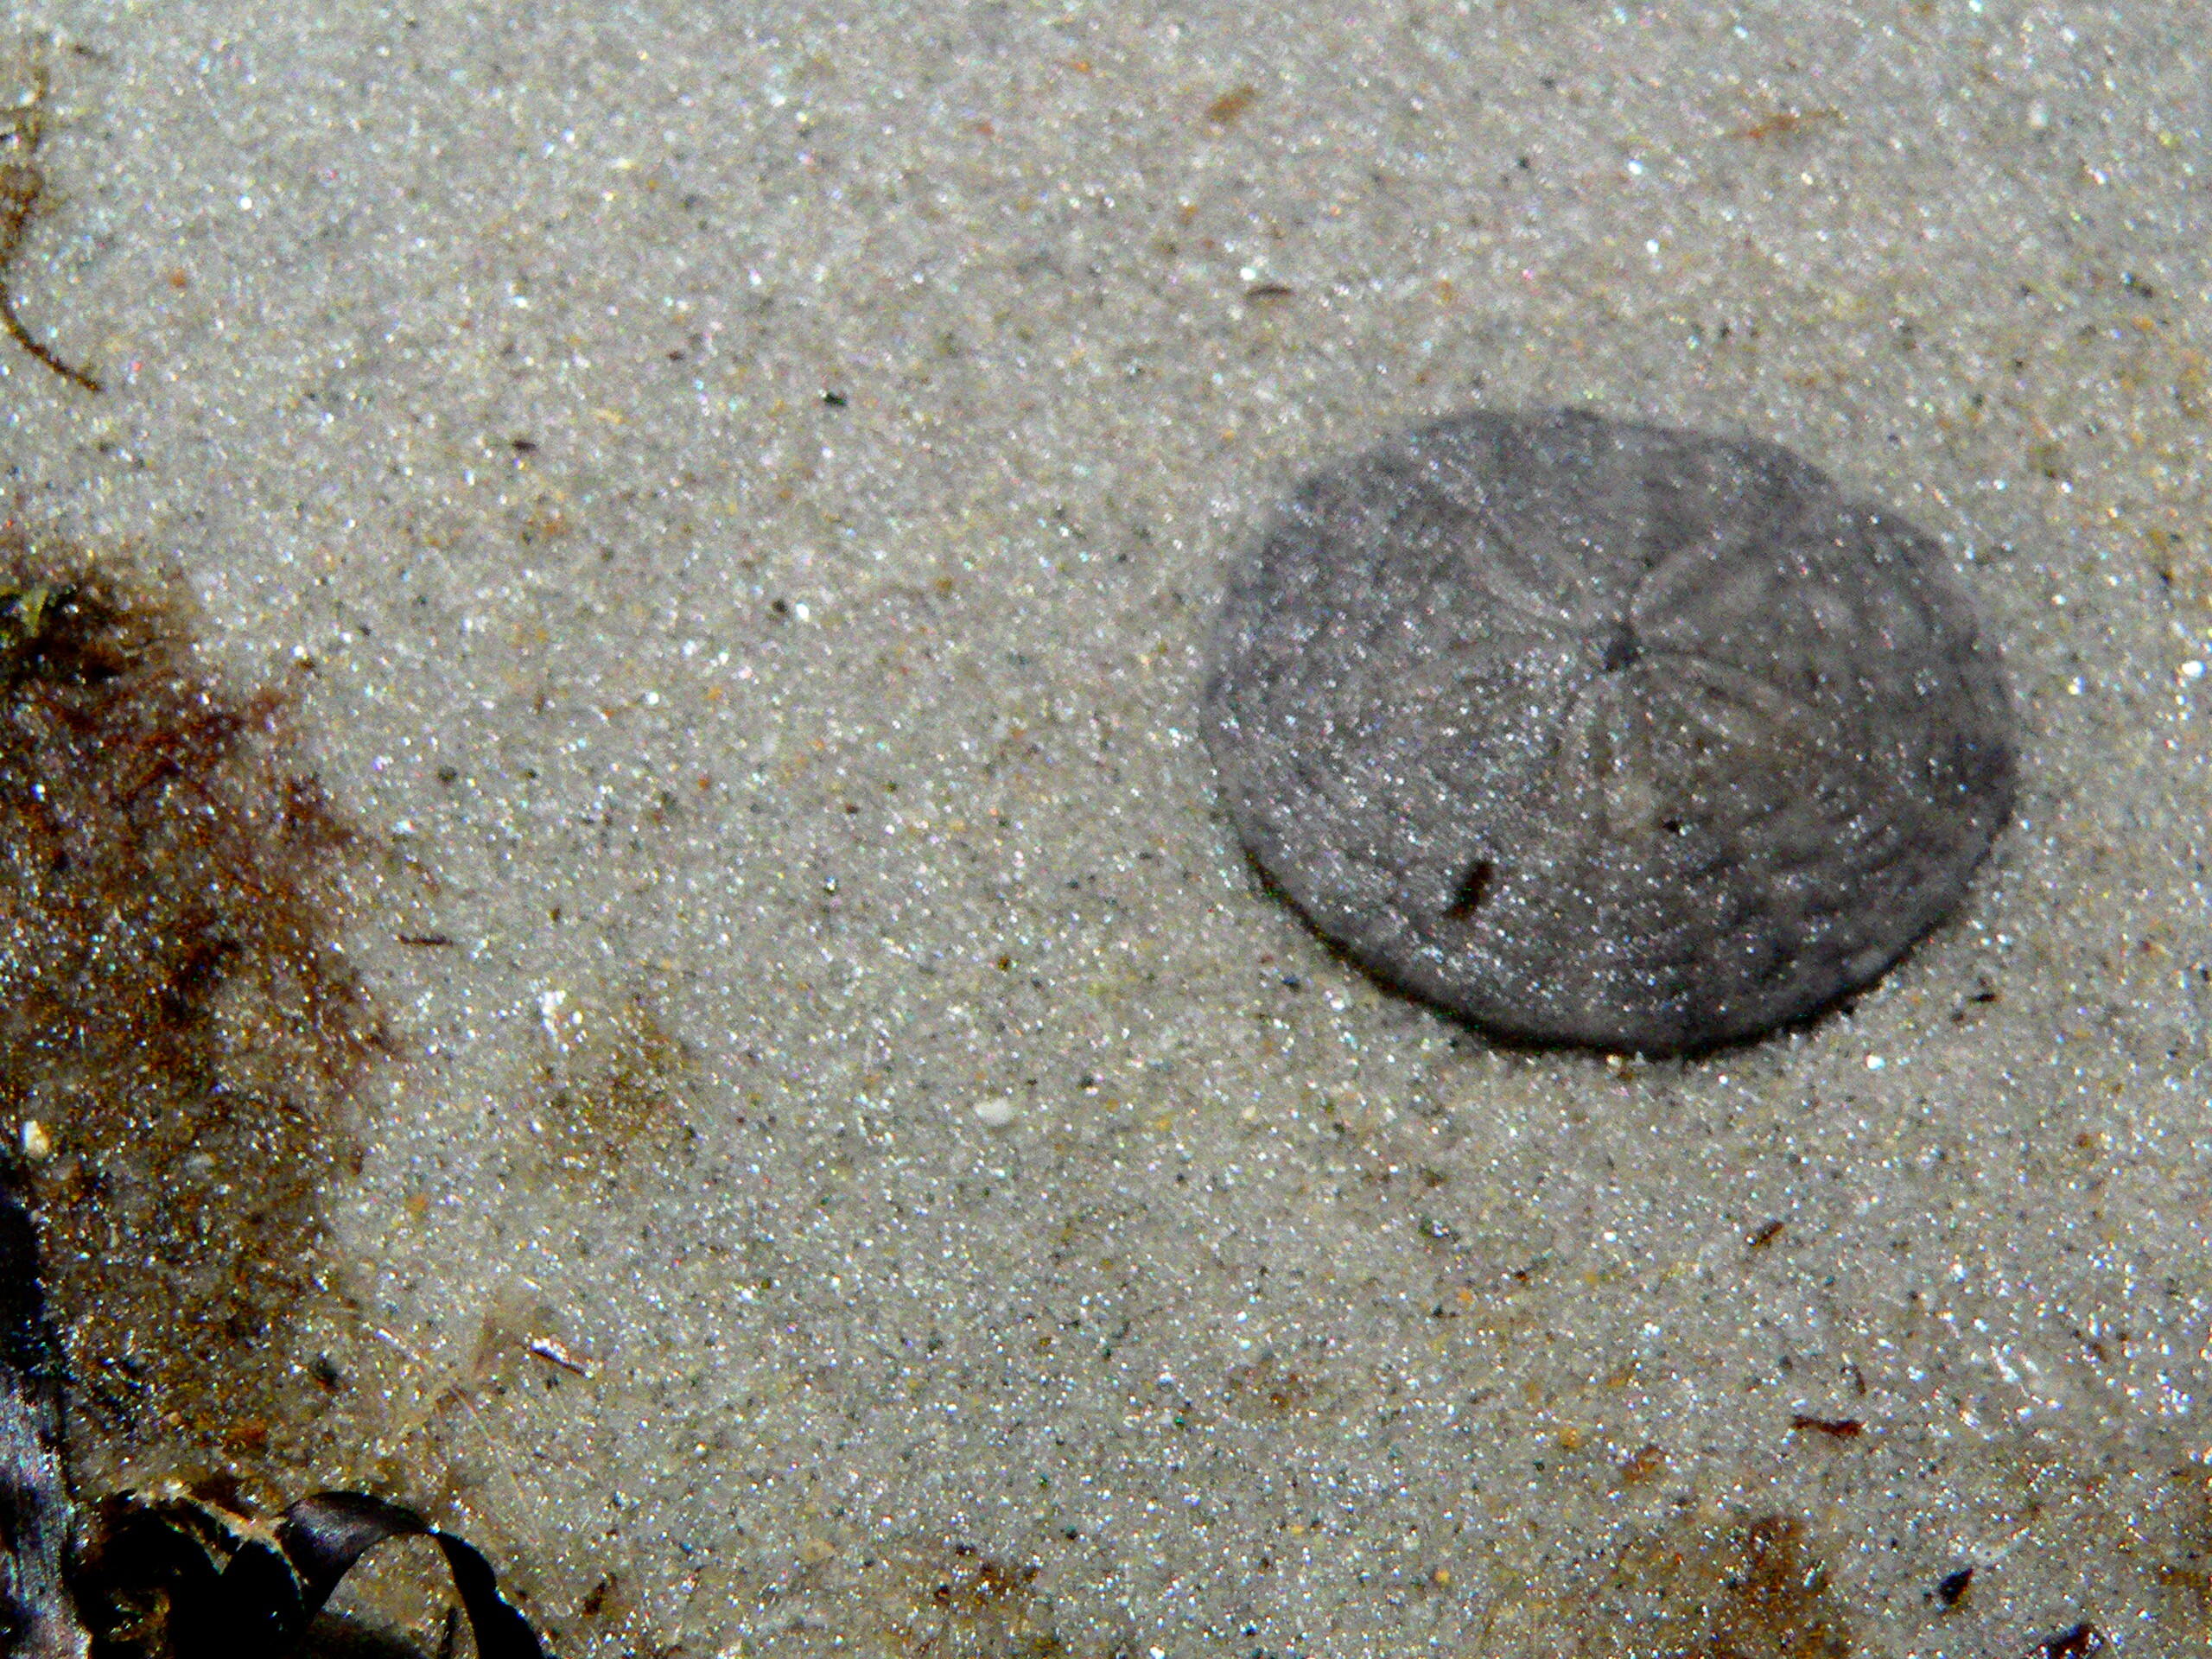 Sand Dollar (user submitted)